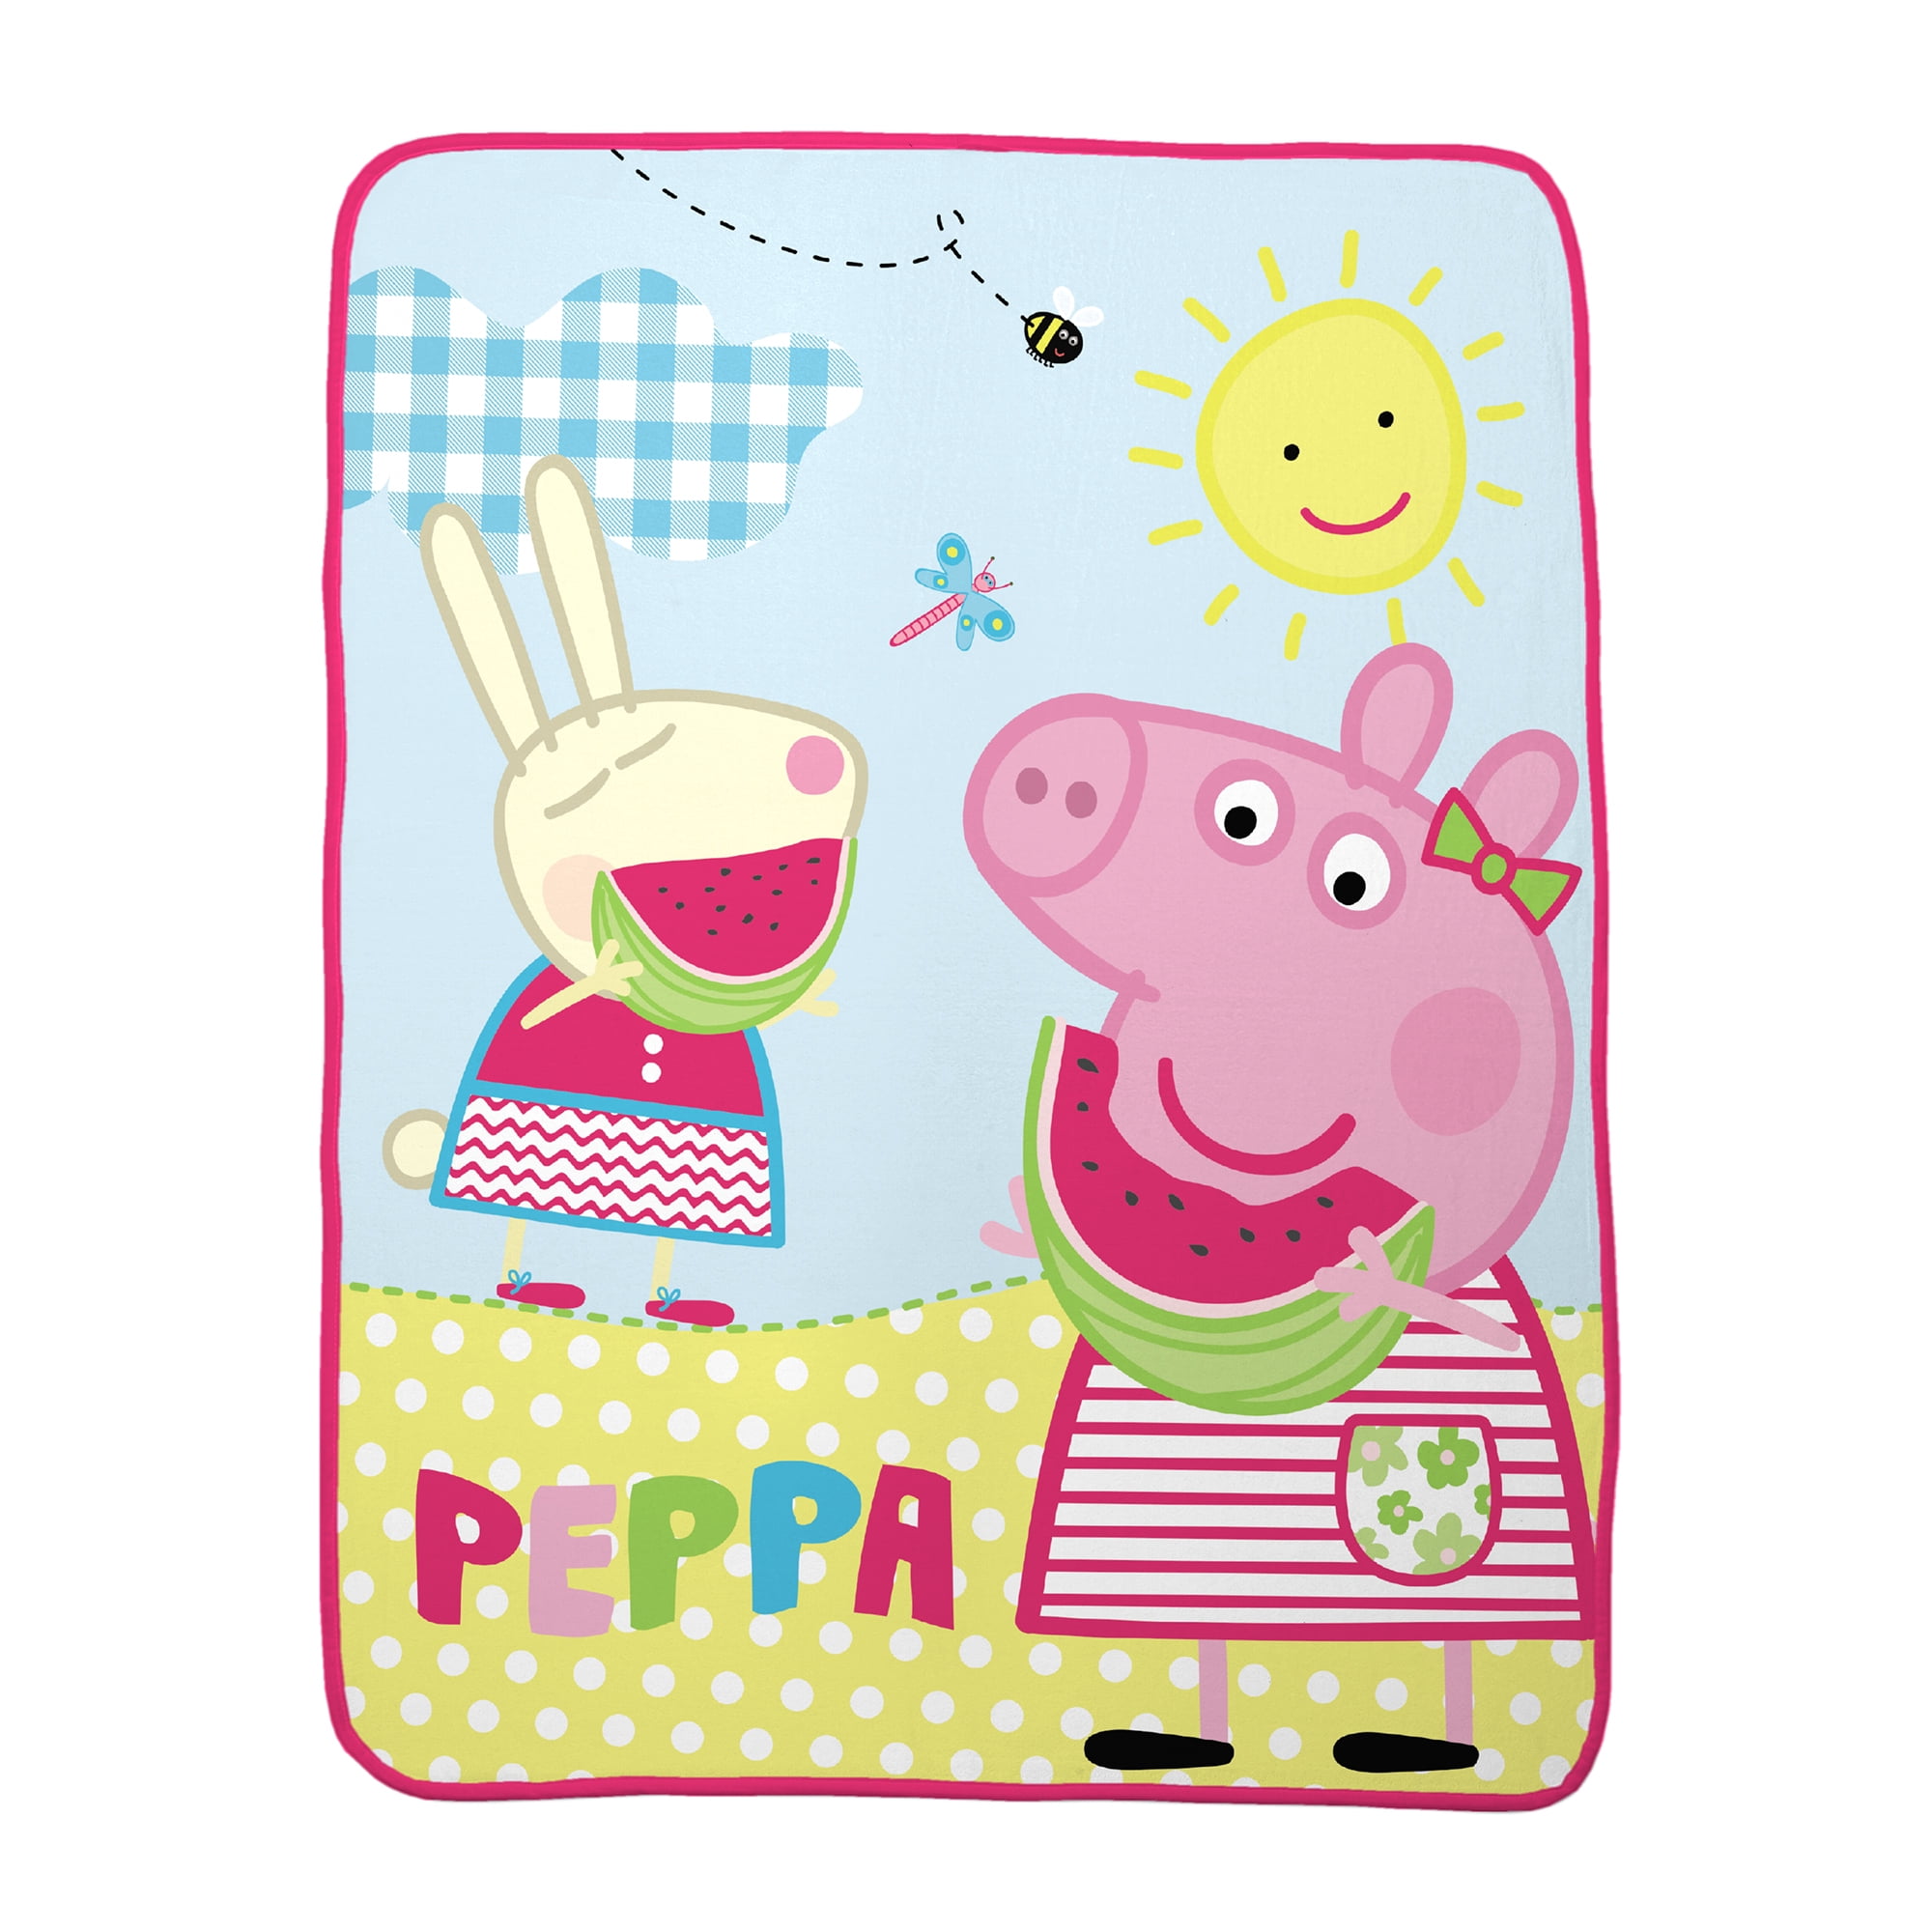 PEPPA PIG Pink FLEECE BLANKET w/ Plush Toy 2pc Girls Floral Bed Lap Throw Cover 